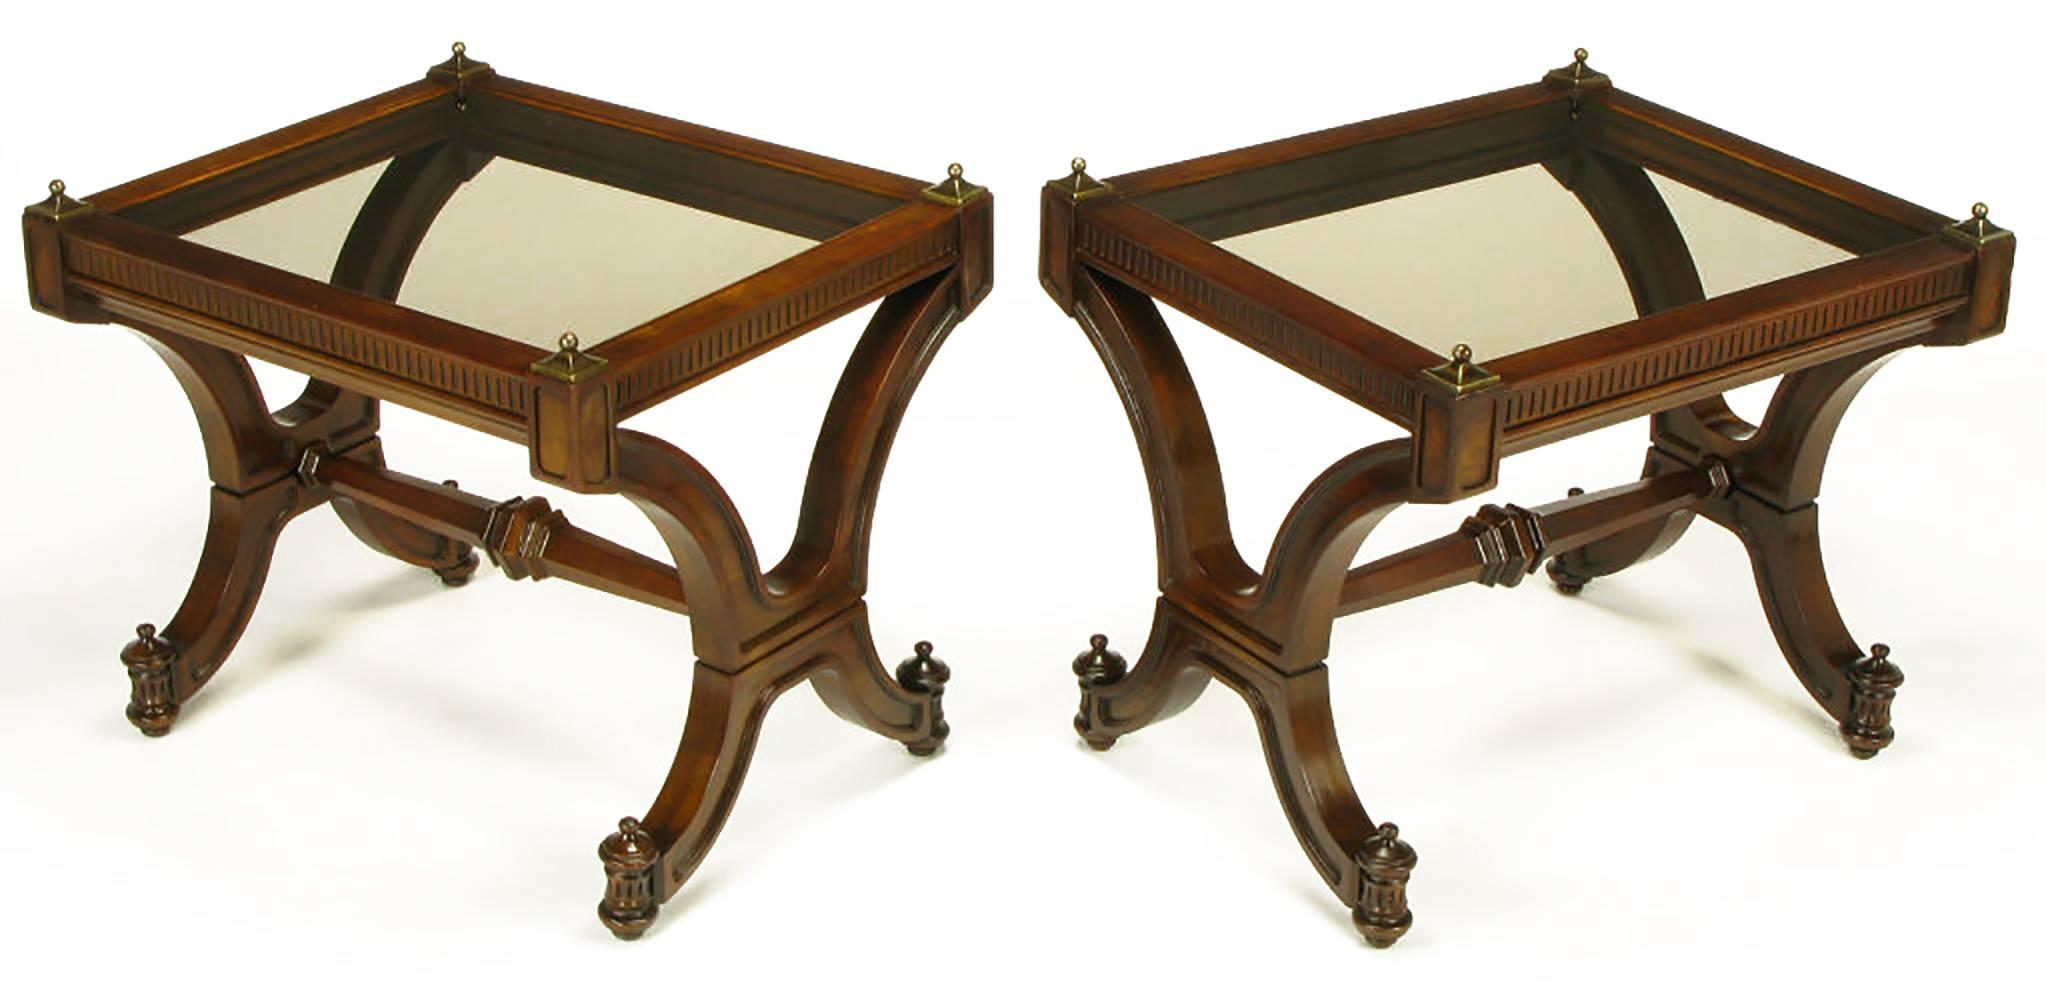 Pair of Empire revival end tables in mahogany wood with curved X-form legs, and substantial hexagonal carved center stretcher. Recessed carved panels on the interior and exterior of the legs. Finial topped feet are fluted half round columns. Fluted